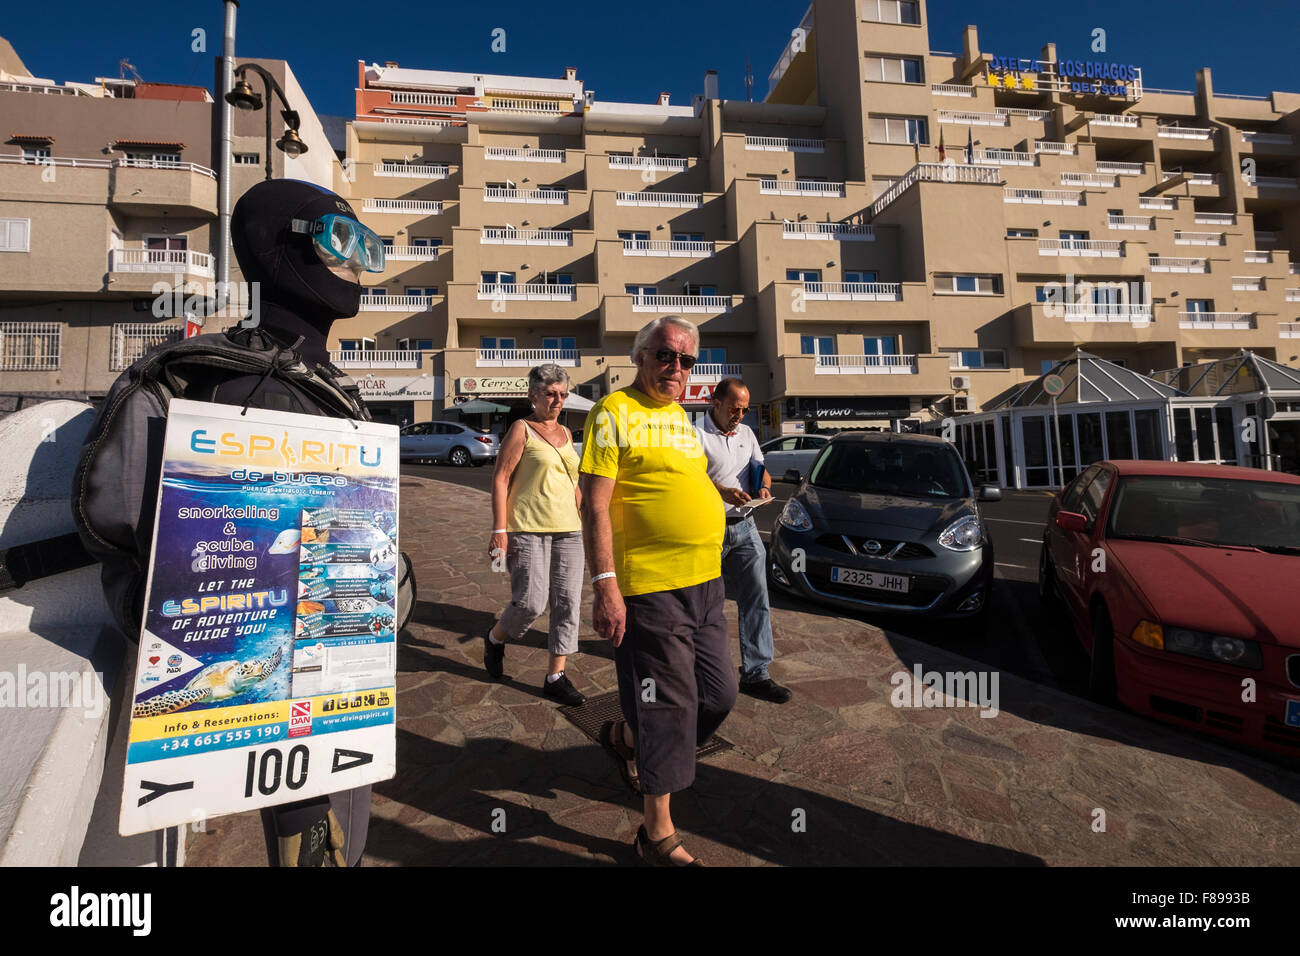 Mannequin in a divers wetsuit advertising a dive centre with diving classes in Puerto santiago, Tenerife, Canary Islands, Spain. Stock Photo